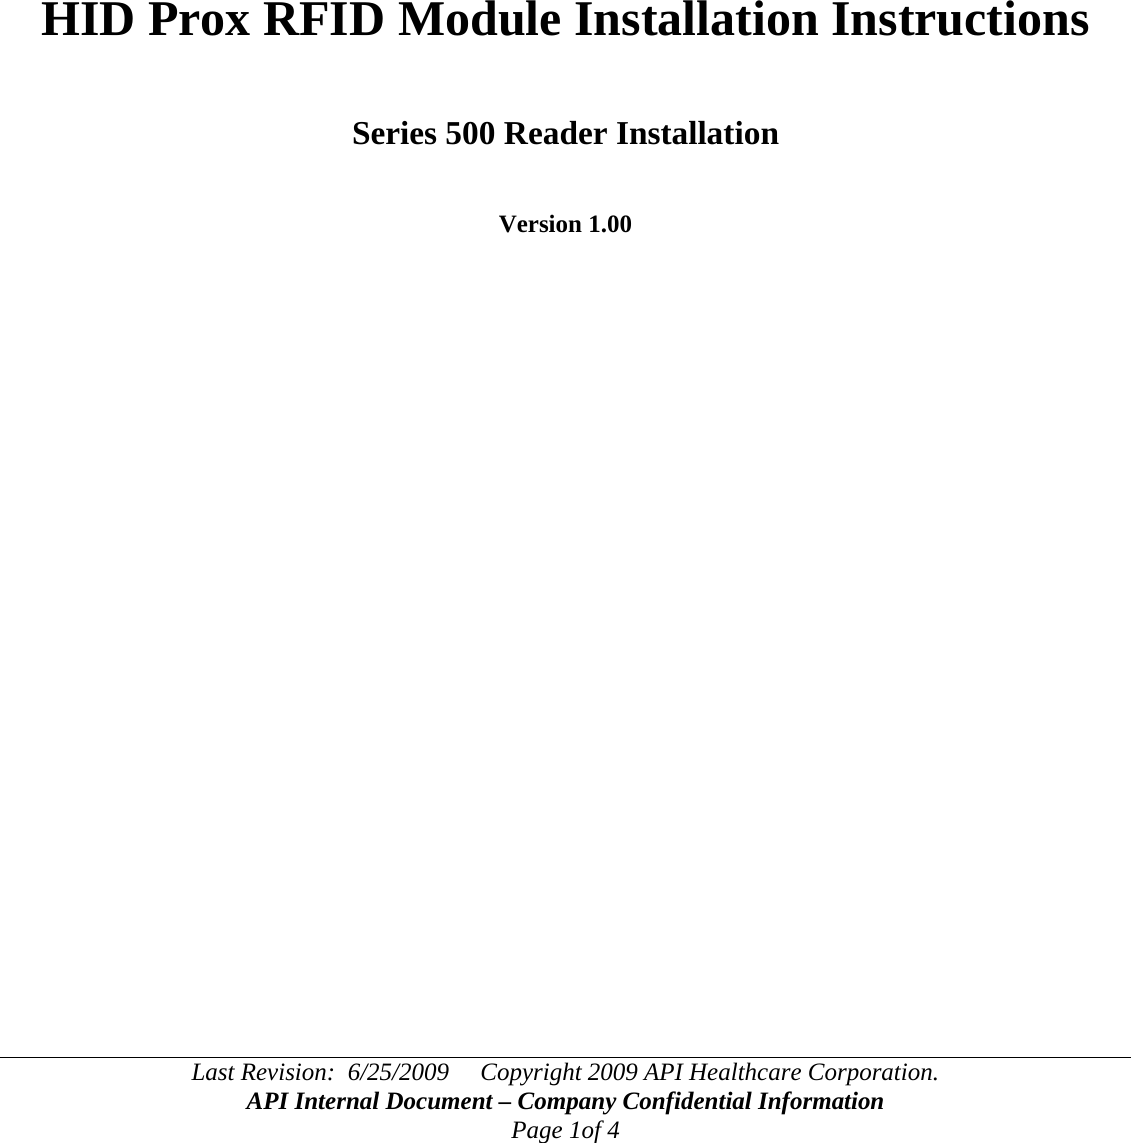 Last Revision:  6/25/2009     Copyright 2009 API Healthcare Corporation. API Internal Document – Company Confidential Information Page 1of 4       HID Prox RFID Module Installation Instructions   Series 500 Reader Installation   Version 1.00          